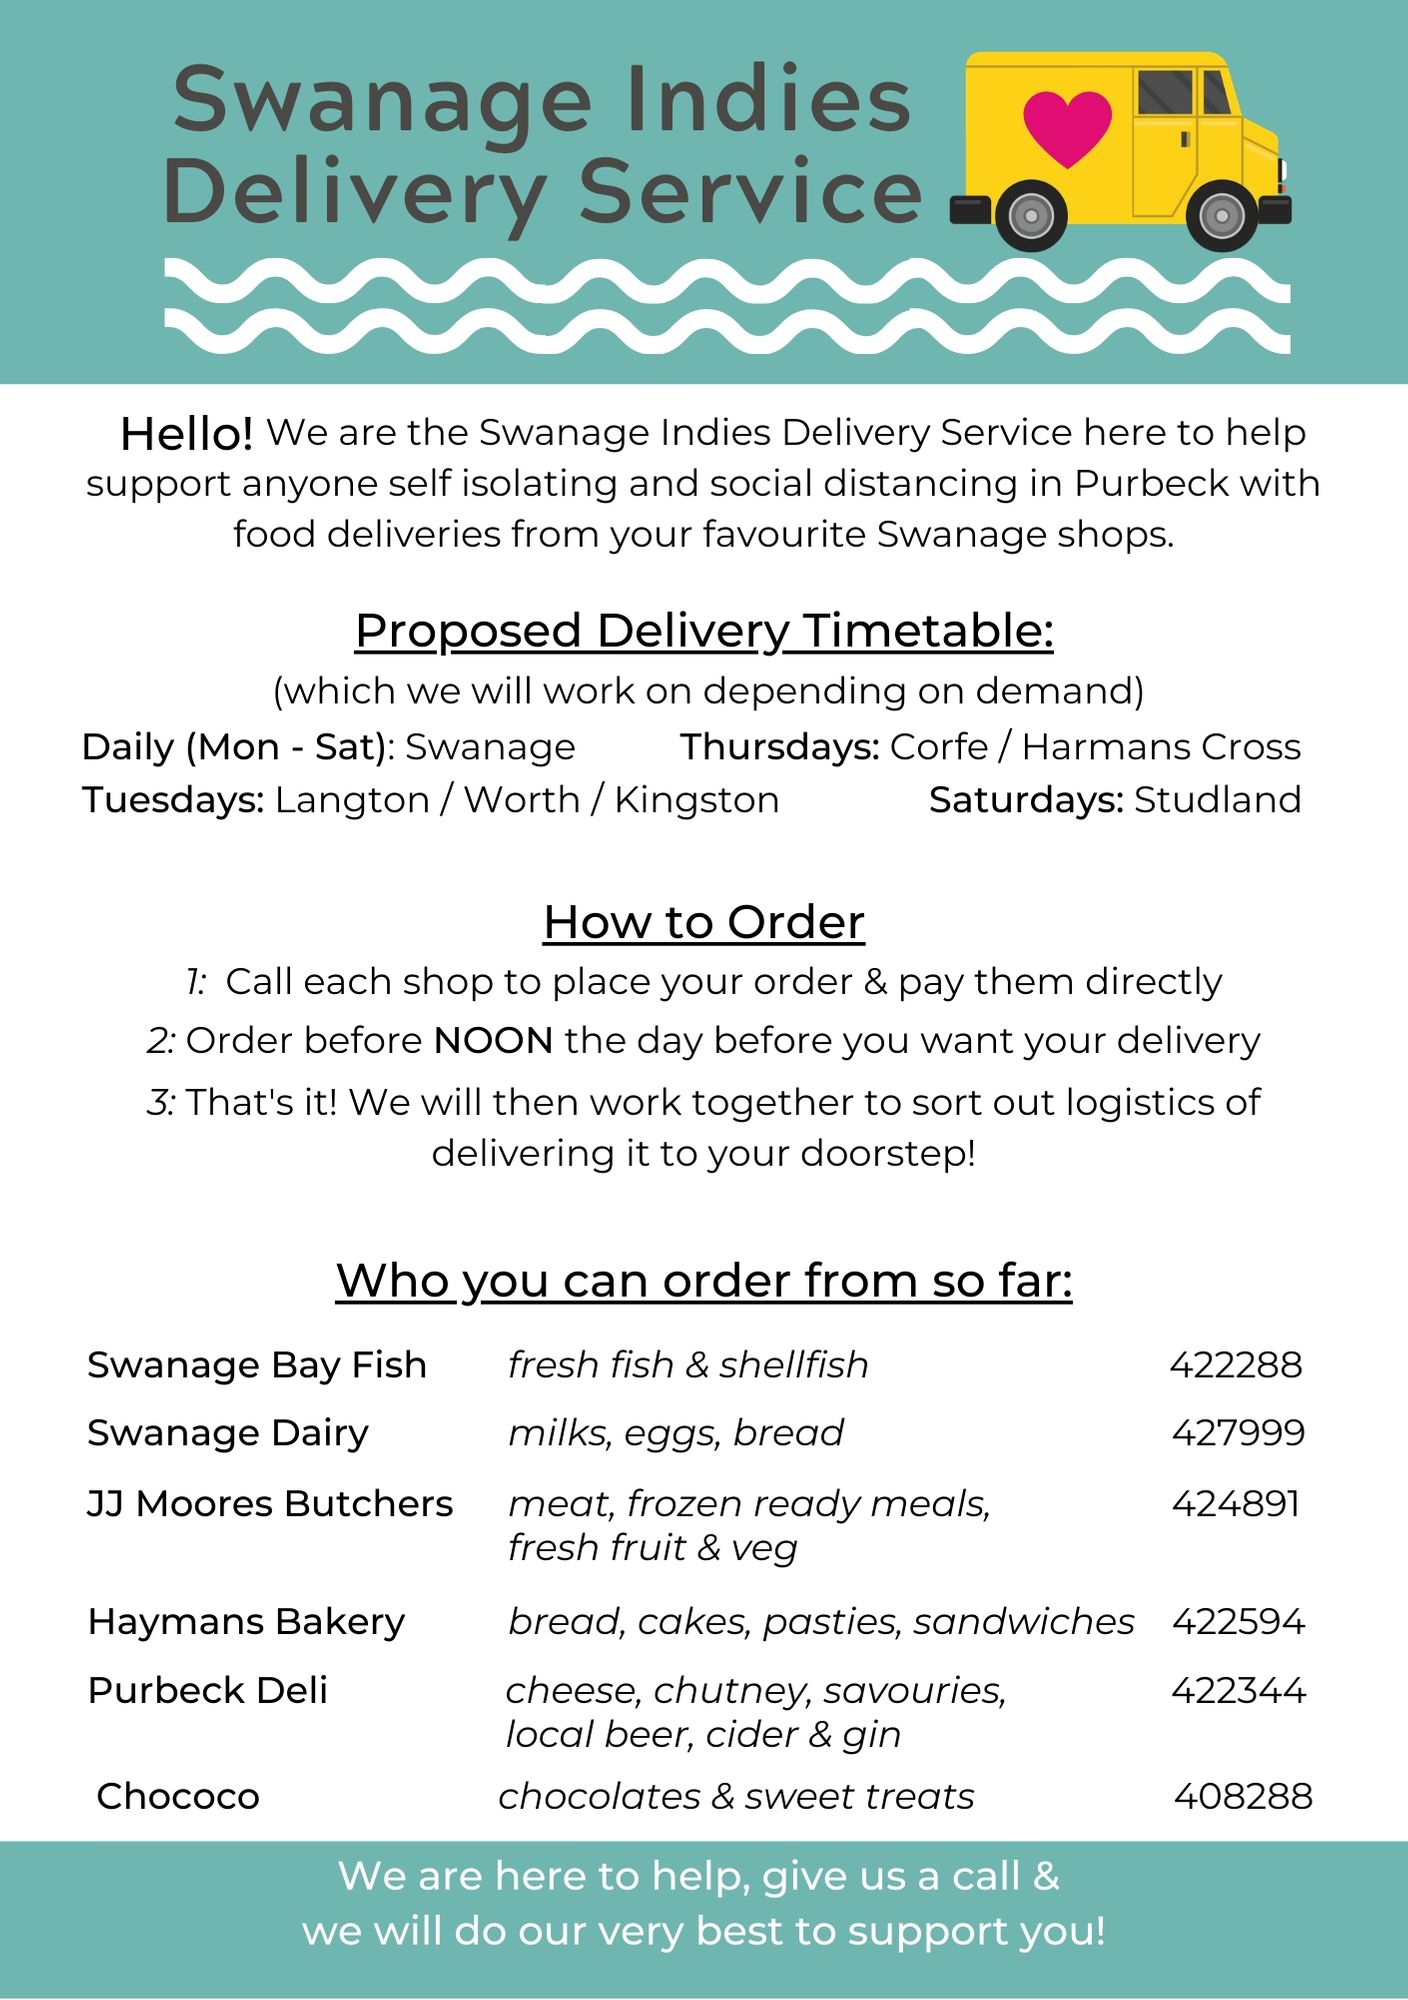 Swanage Indies Delivery Service information